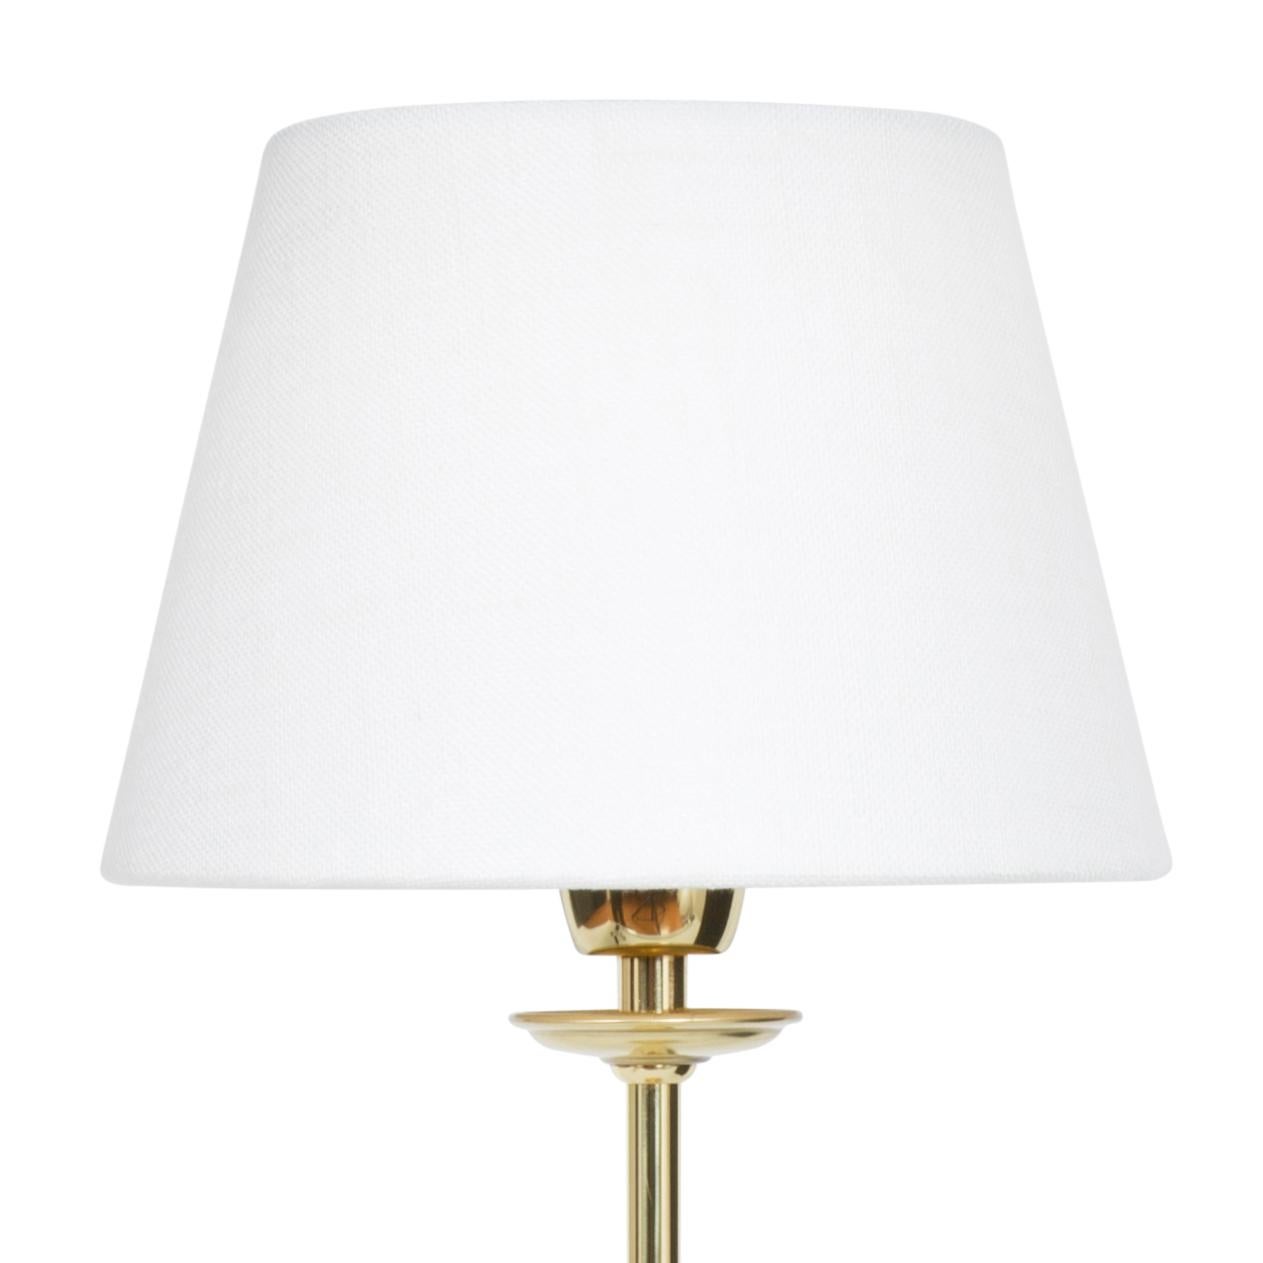 Lamp model Uno medium polished brass table lamp designed by Konsthantverk and manufactured by themselves.

The production of lamps, wall lights and floor lamps are manufactured using craftsman’s techniques with the same materials and techniques as